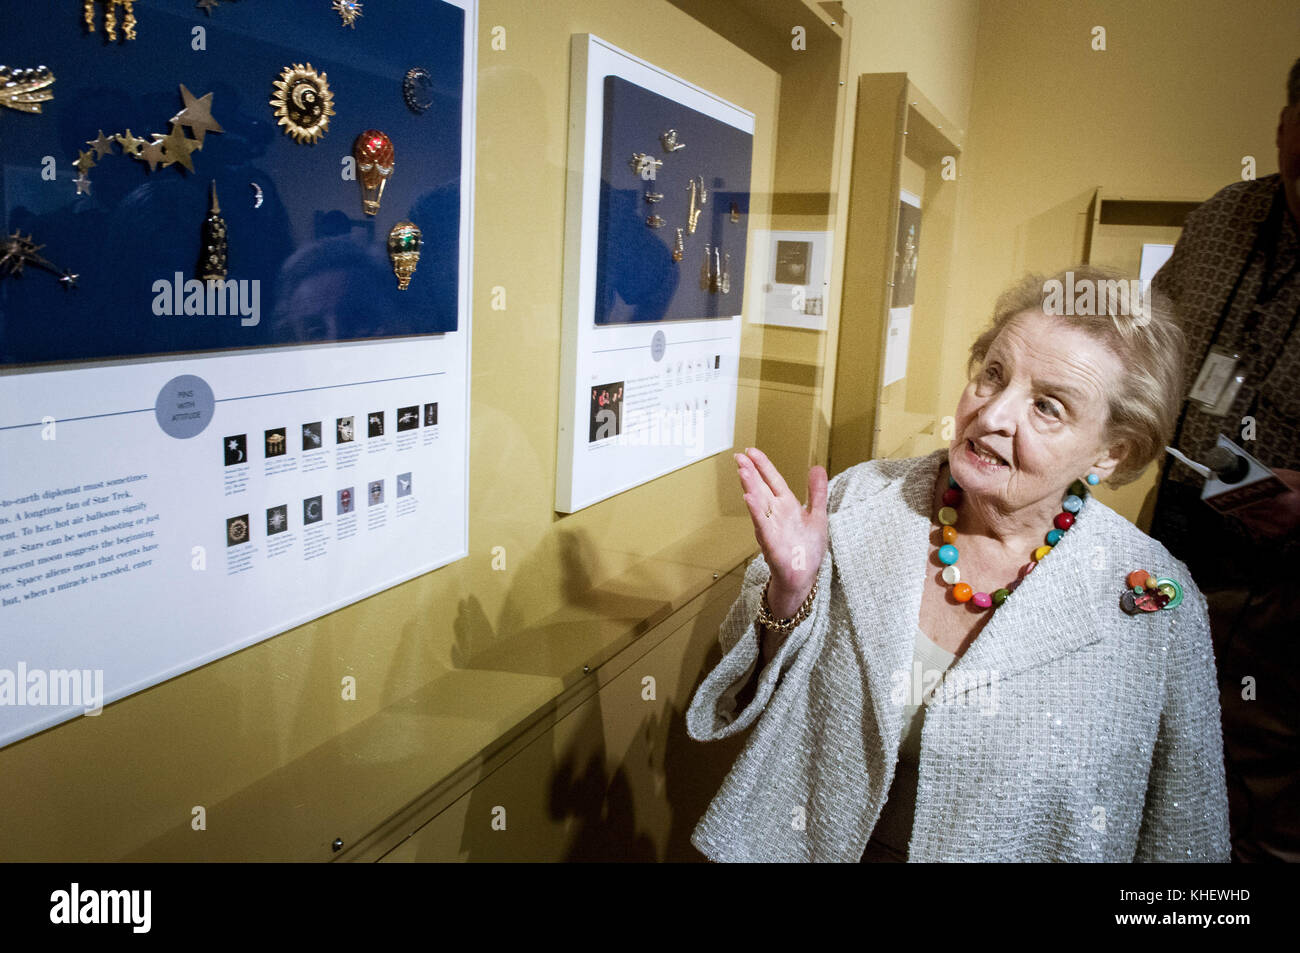 Phoenix, Arizona, USA. 9th Jan, 2014. Former Secretary of State Madeline Albright speaks about her many pins that she used to convey various messages as she met with dignitaries and world leaders during the course of her career first at the United Nations and then in the Clinton administration. The exhibition, ''Read My Pins: The Madeleine Albright Collection'' explores the stories and symbolism behind more than 200 historically significant pins is on display at the Phoenix Art Museum in Arizona. She also spoke about North Korea, Russia, Iraq, Dennis Rodman and Robert Gates. (Credit Image: Stock Photo